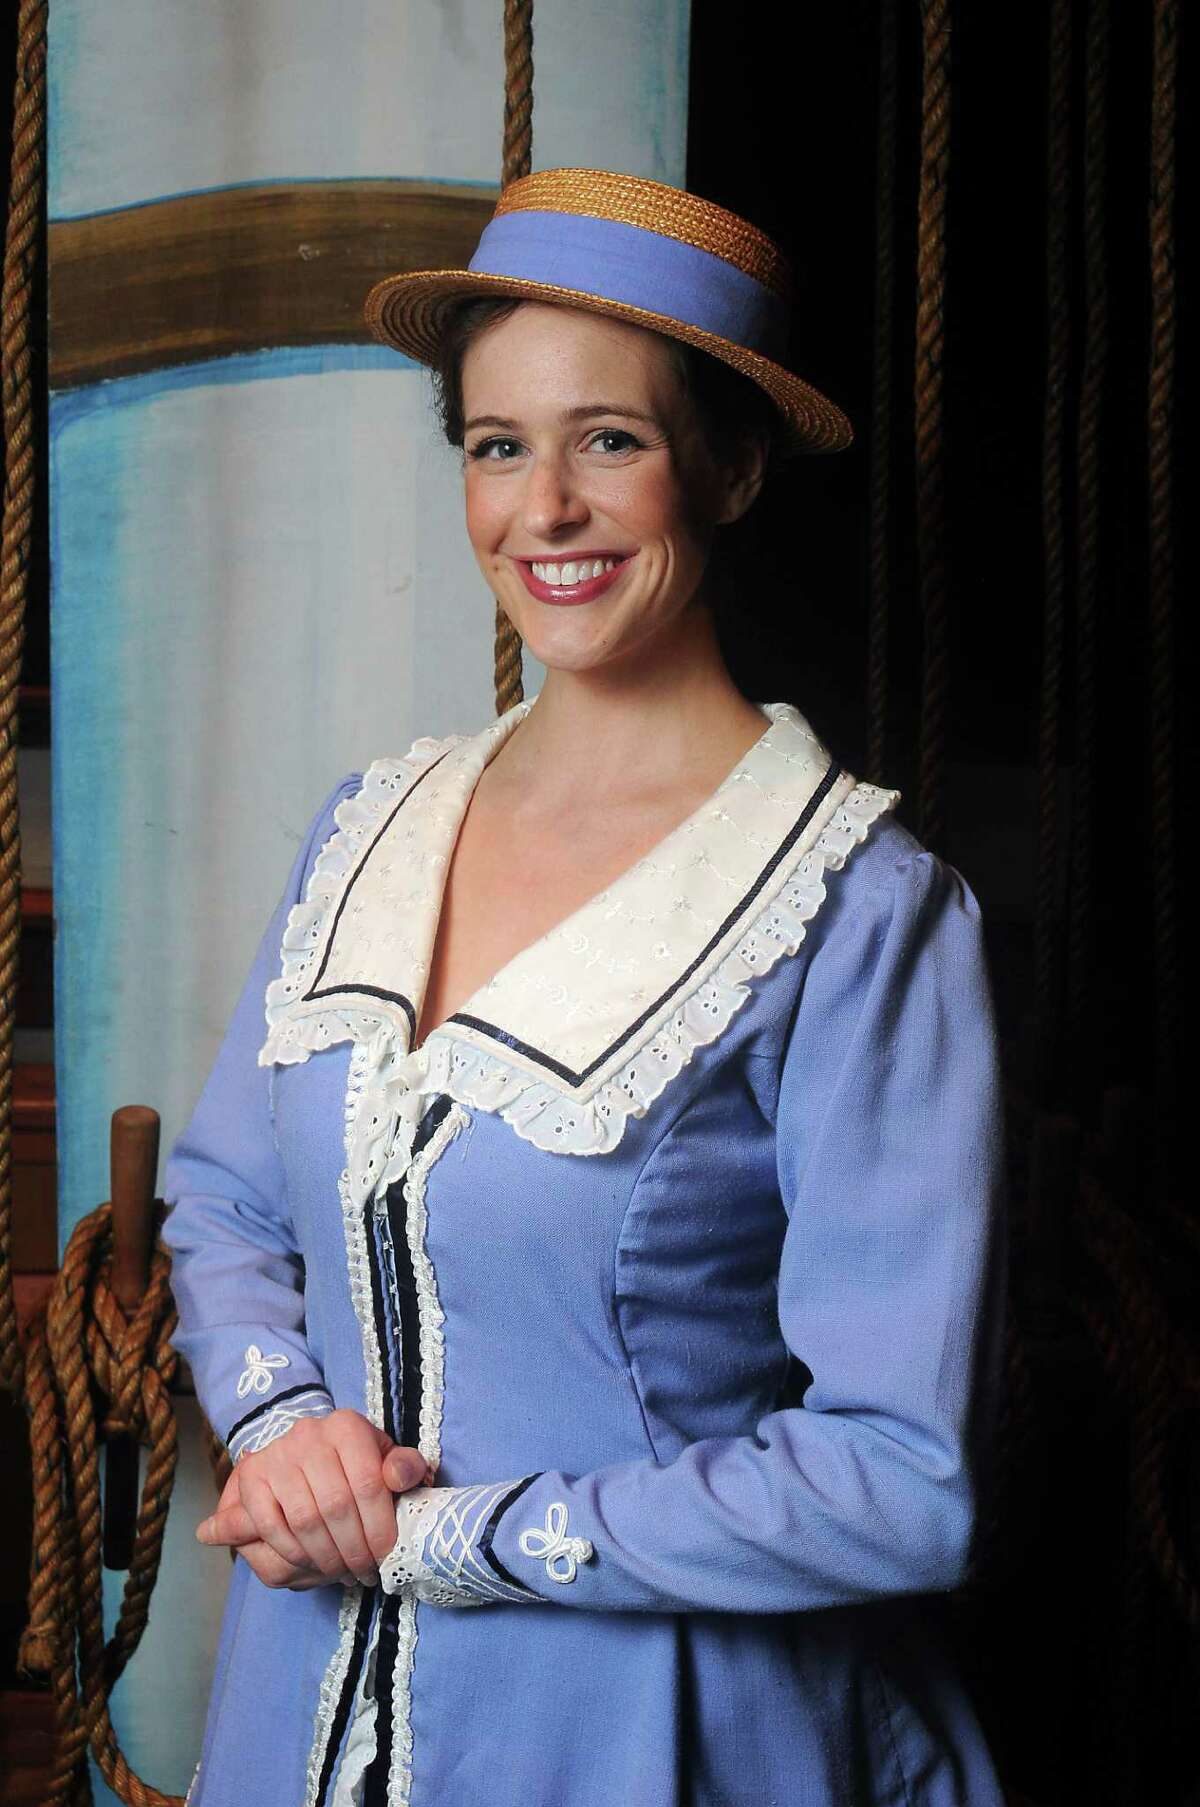 Amanda Kingston as Josephine at a dress rehearsal of the Gilbert and Sullivan comedy "HMS Pinafore" at the Wortham Theater Monday July 15, 2013.(Dave Rossman photo)